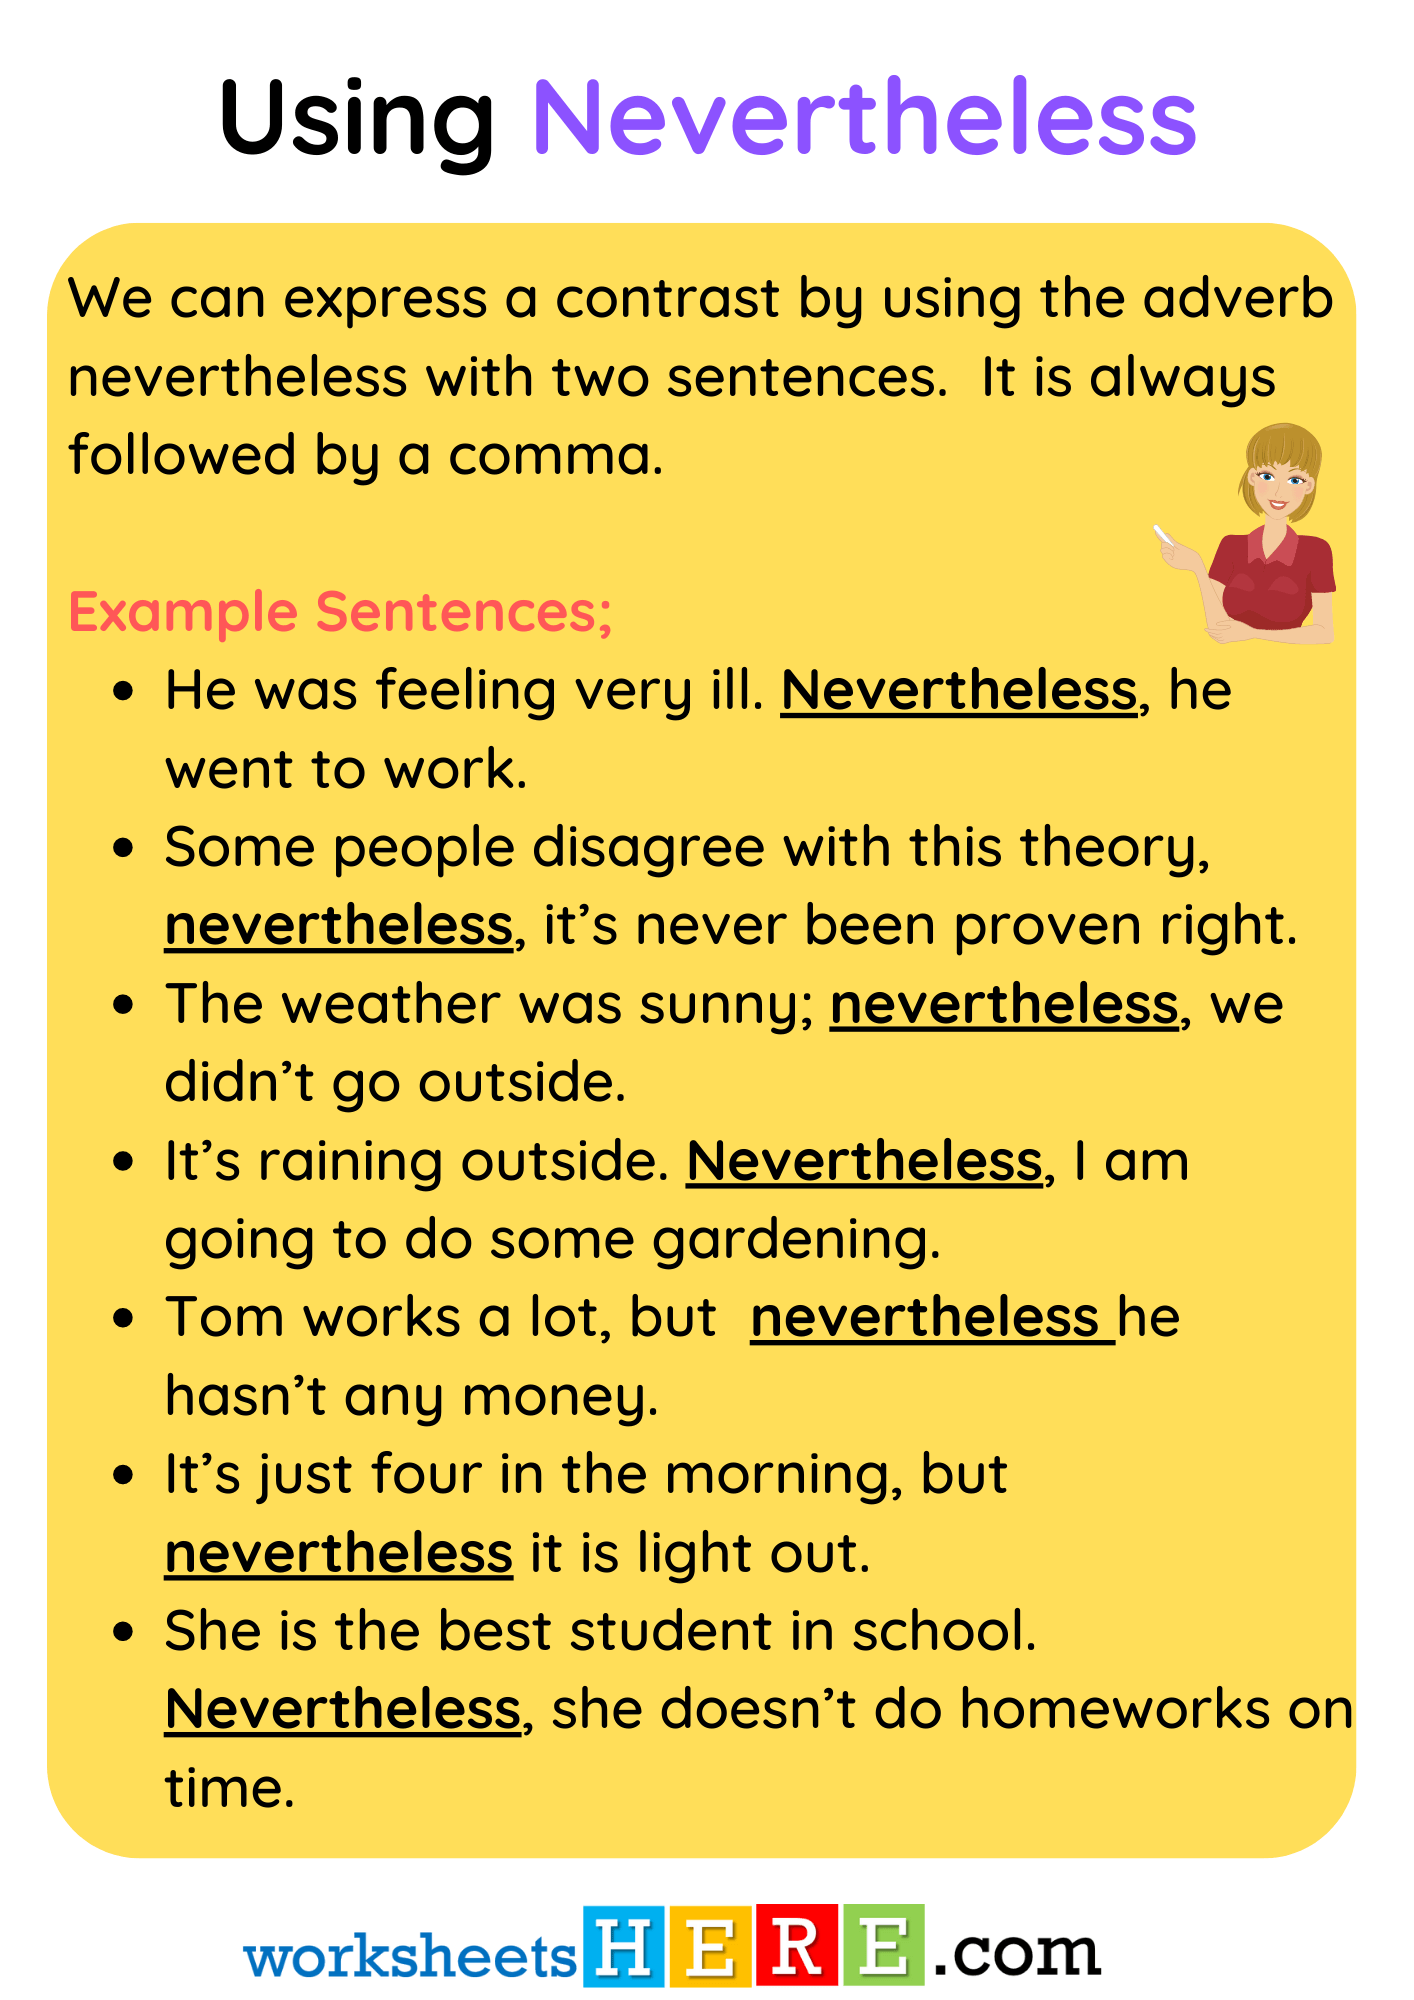 Using Nevertheless, Definition and Example Sentences PDF Worksheet For Students